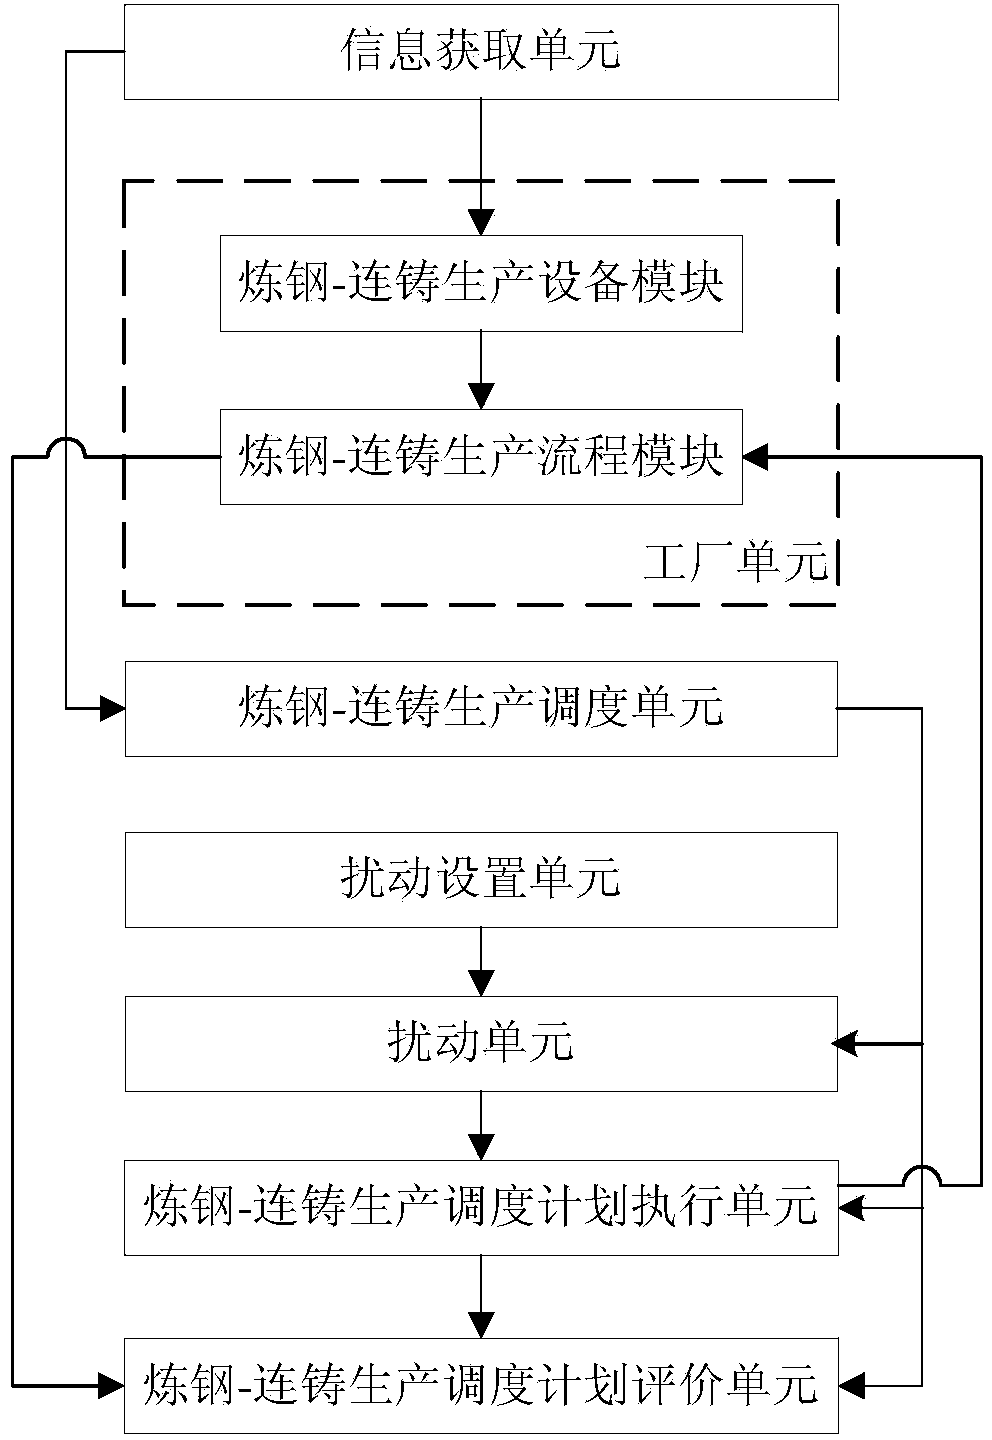 Scheduling system and method for steel making and continuous casting production